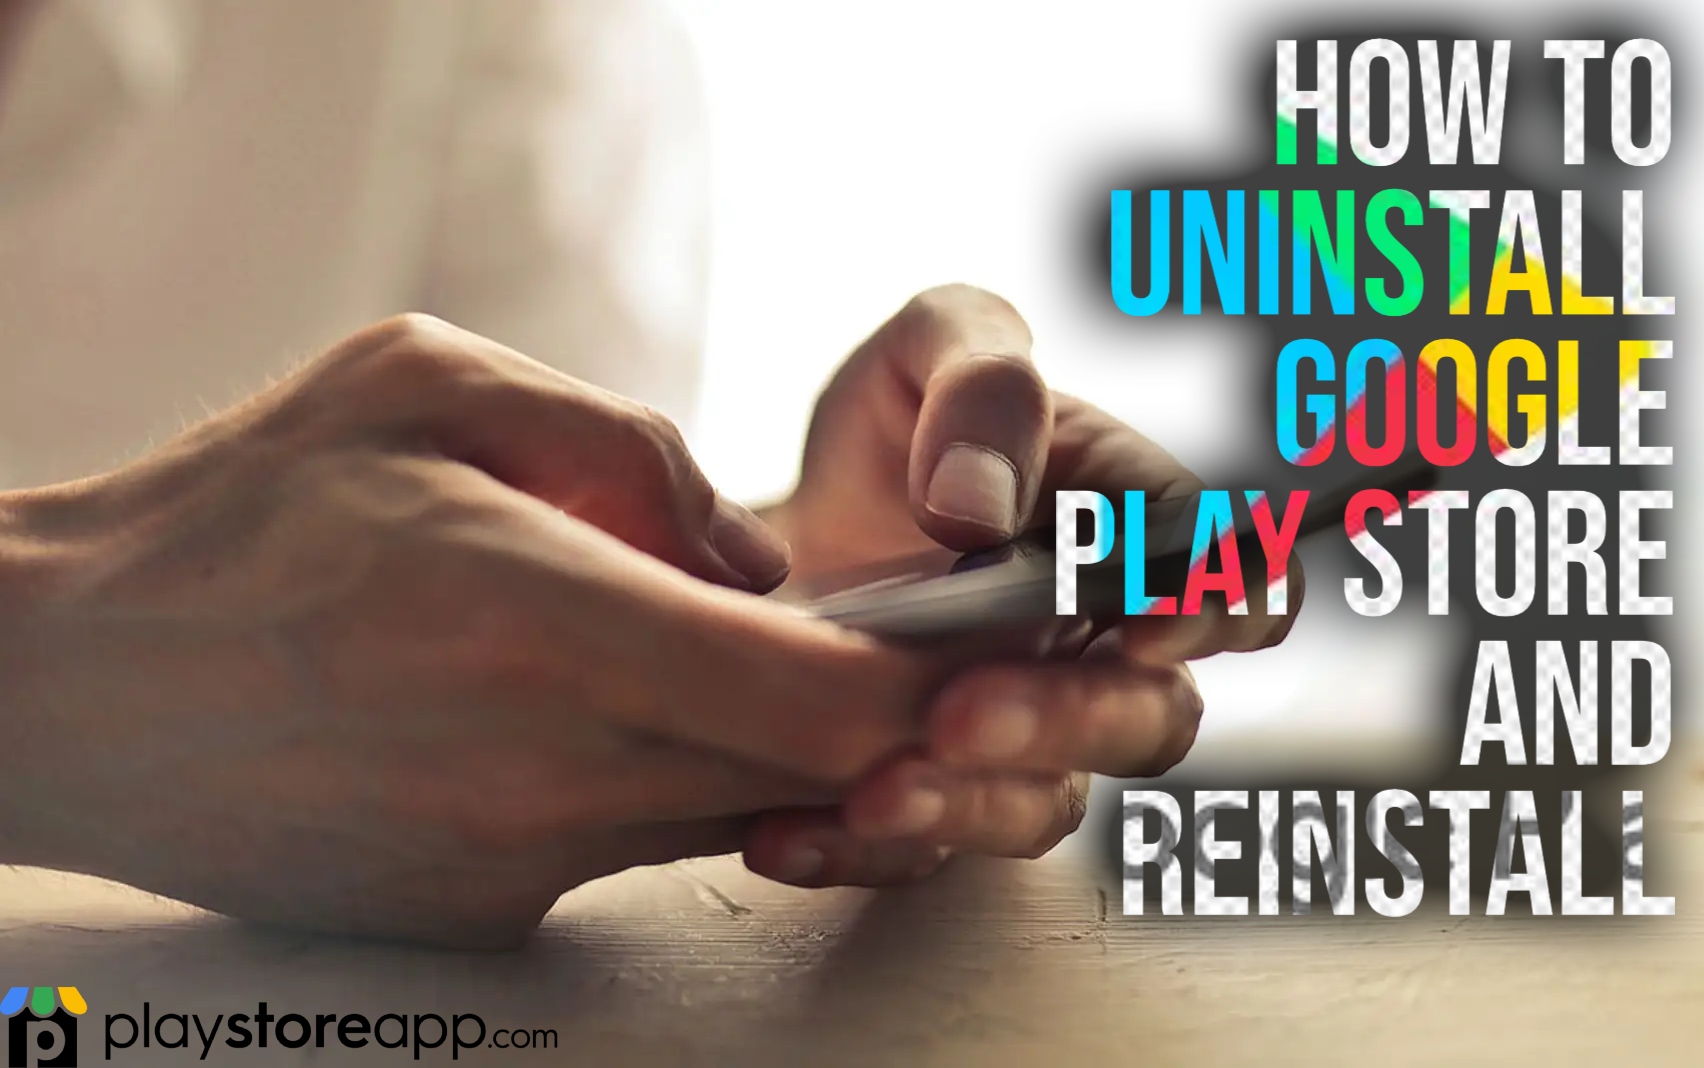 How to Uninstall Google Play Store and Reinstall